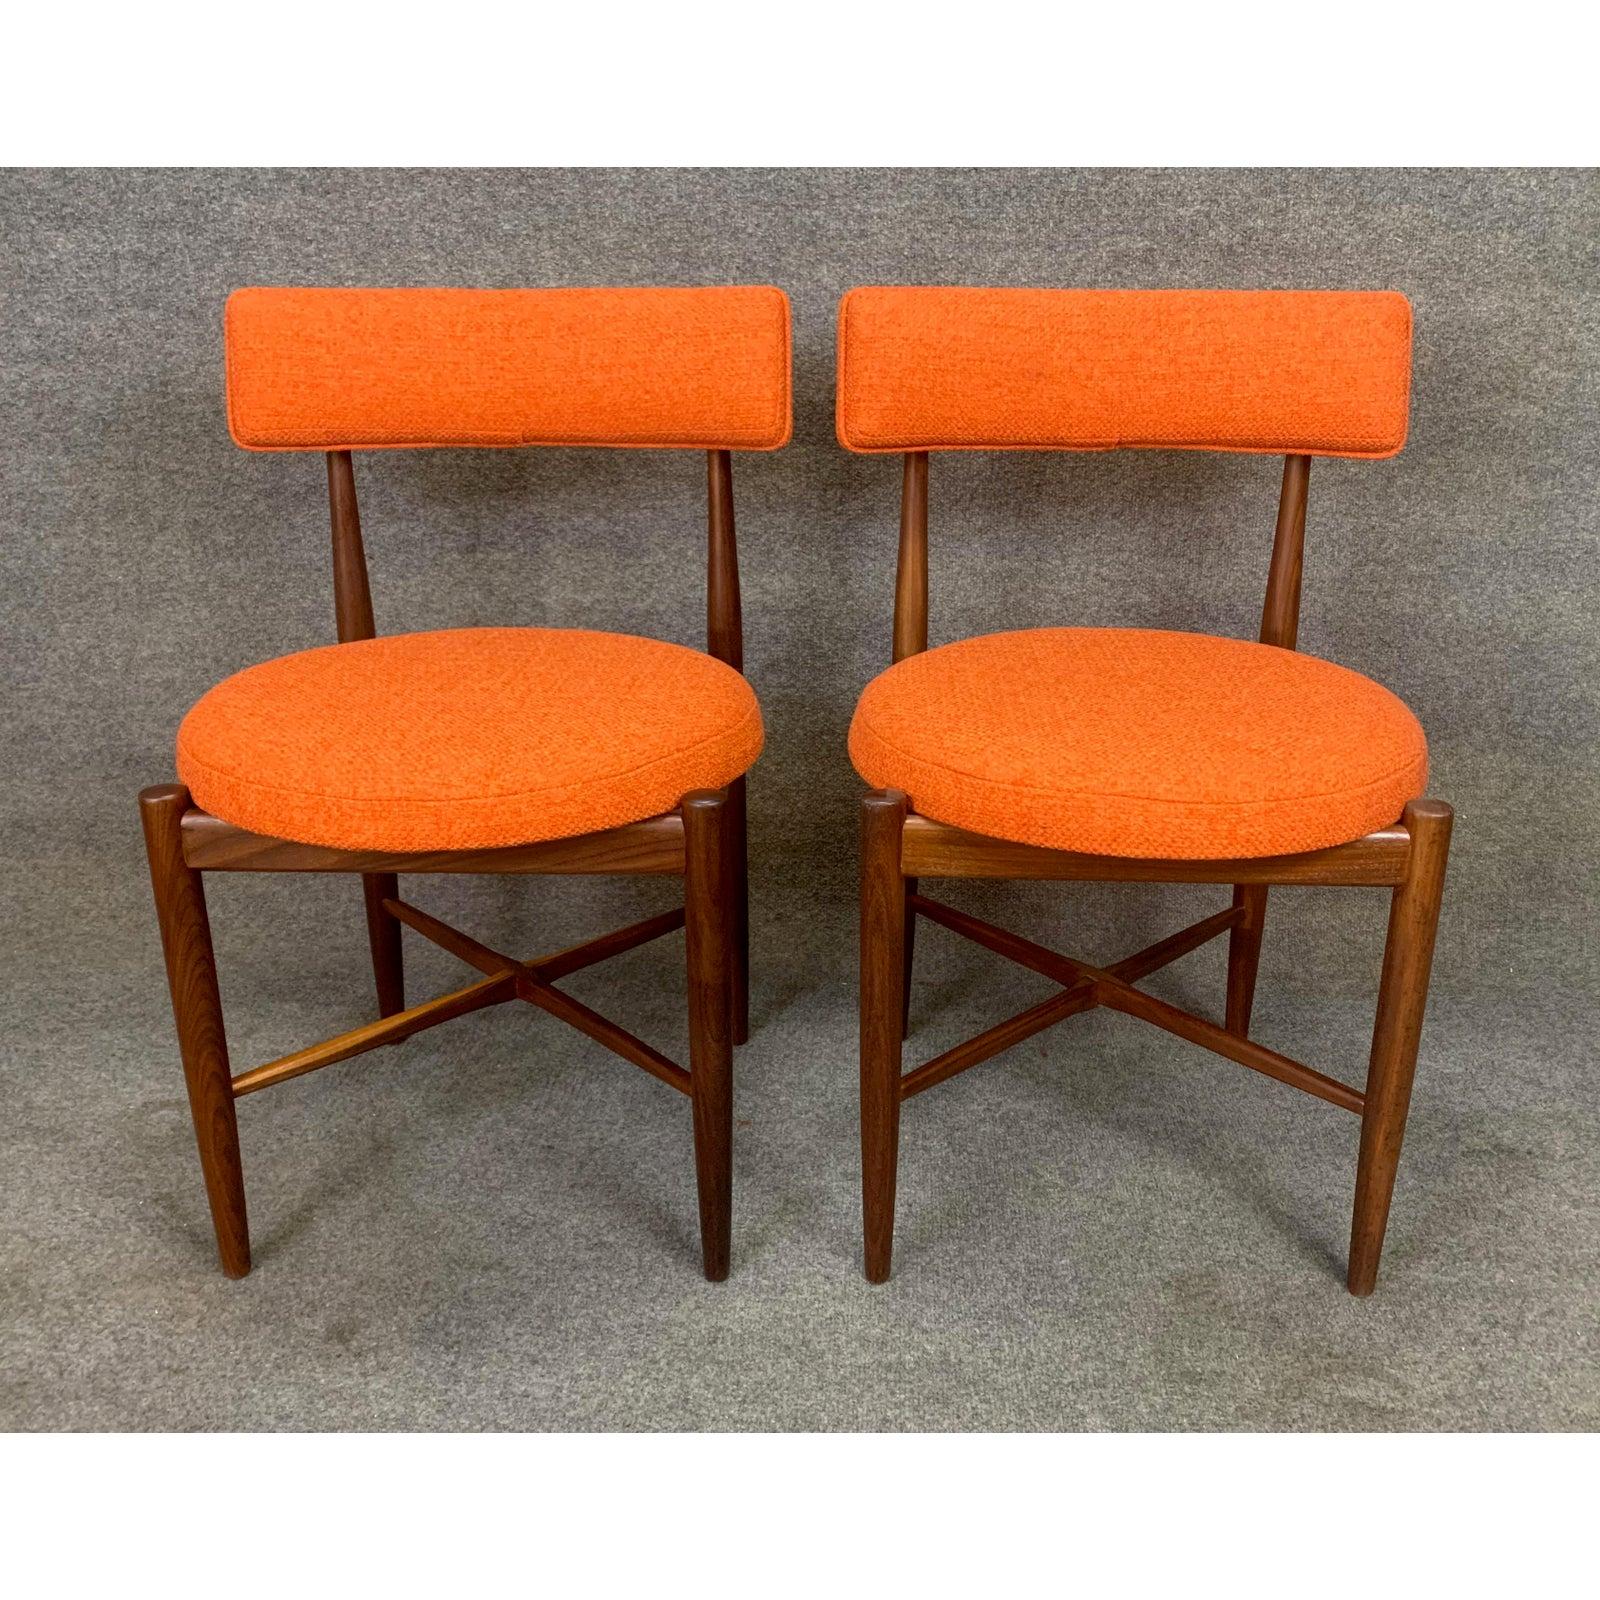 Pair of Vintage British Mid-Century Modern Teak Accent Chairs by G Plan In Good Condition For Sale In San Marcos, CA